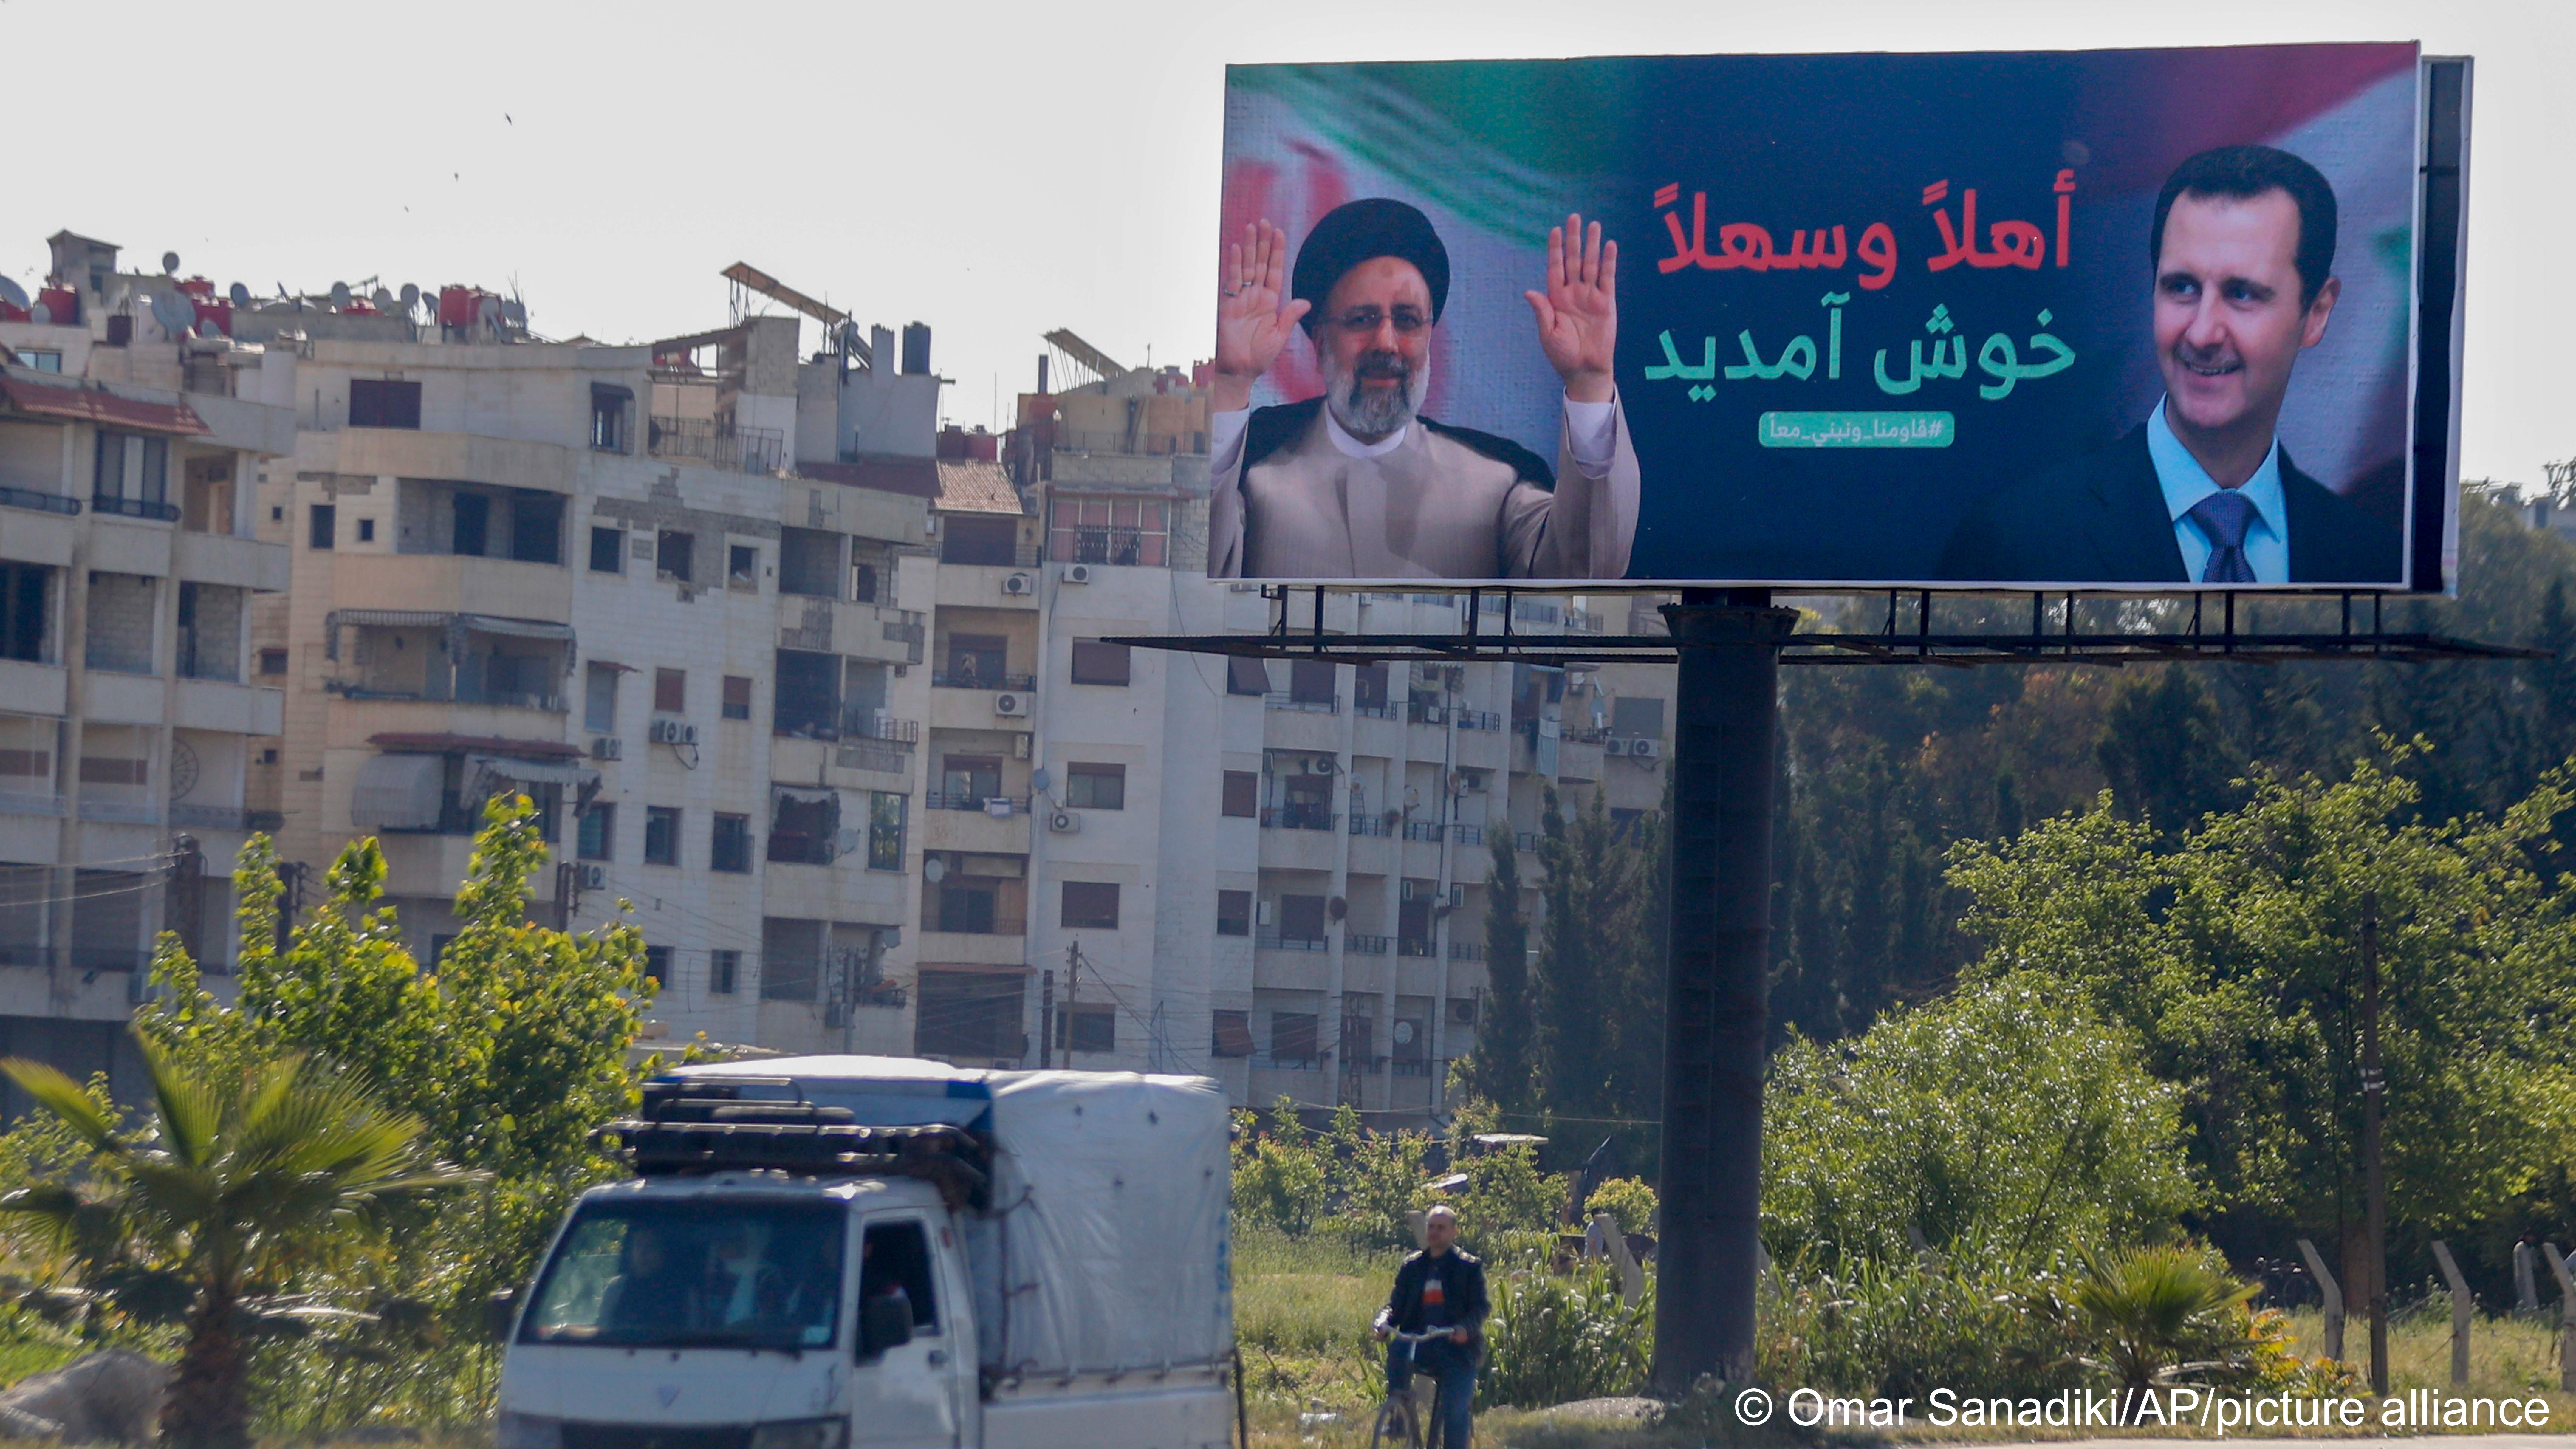  People drive beneath a poster with pictures of Iranian President Ebrahim Raisi (left) and Syrian President Bashar al-Assad that reads “Welcome” in Arabic, Damascus, Syria, 3 May 2023 (photo: Omar Sanadiki/AP/picture alliance)